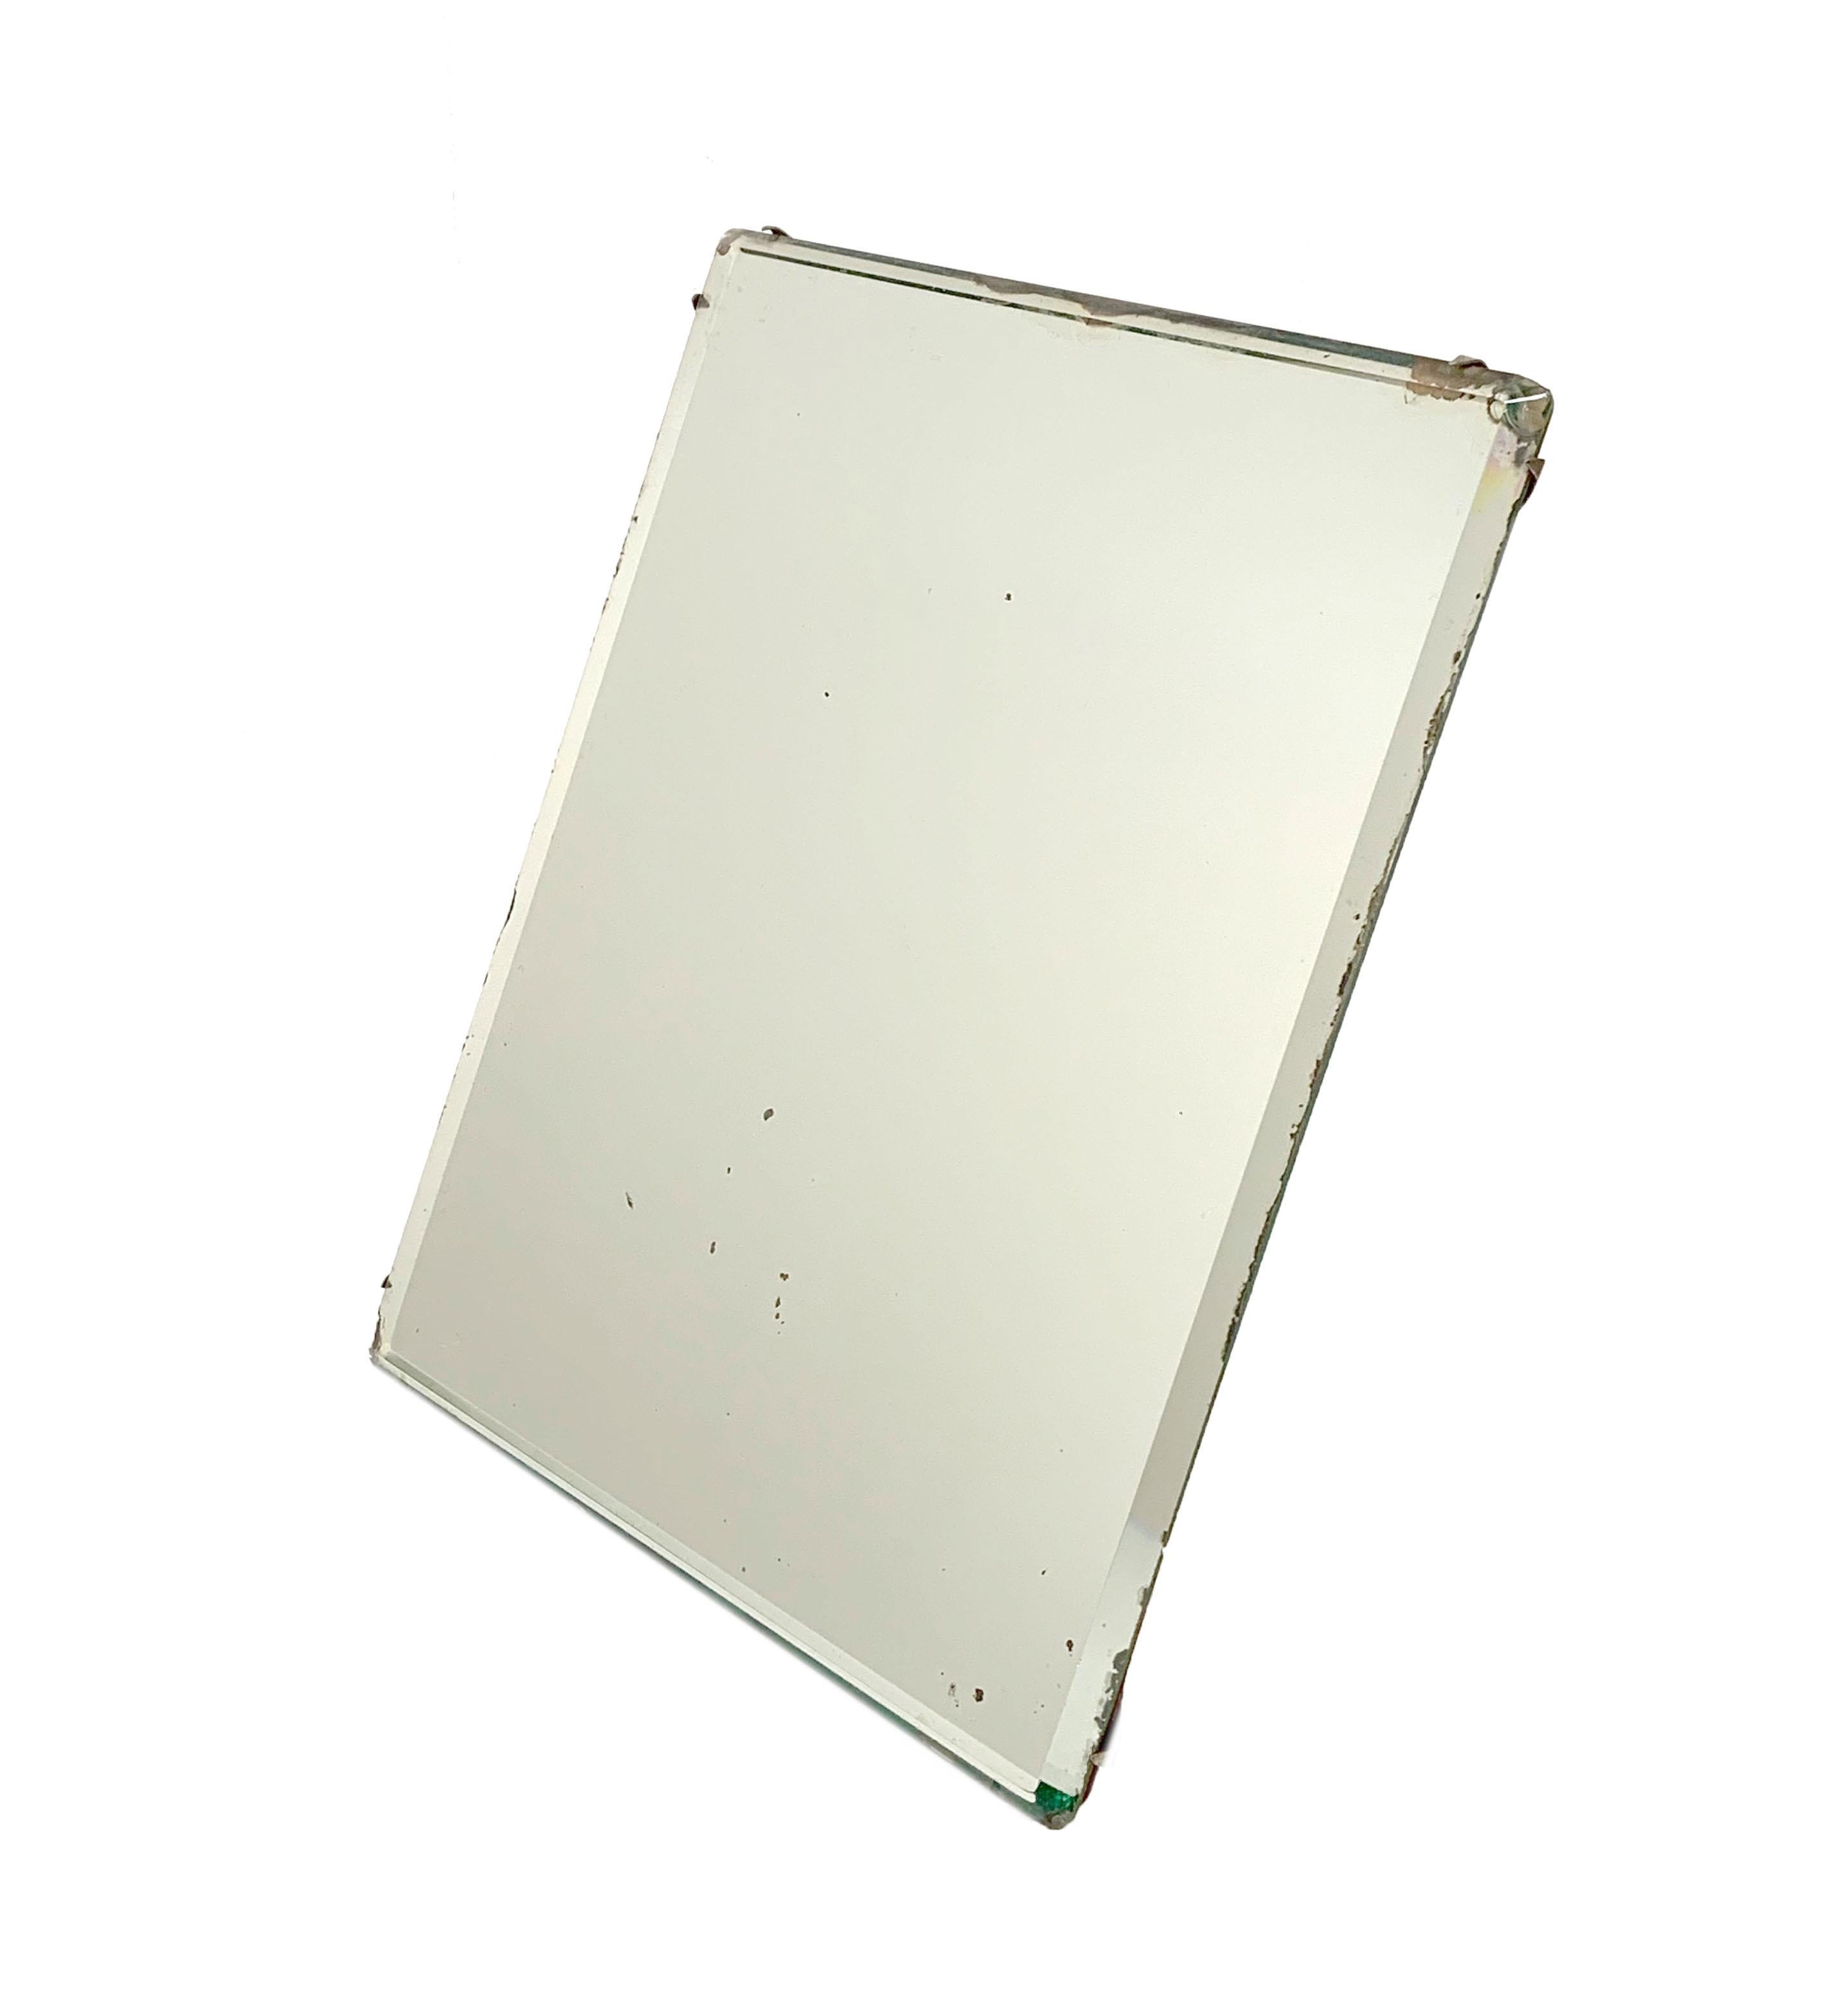 Table or wall mirror. Original vintage conditions. Simple but elegant design. Mirror 12.9 x 10.6 in. has a ground edge, metal corners fixed with old nails. The zipper on the back can be adjusted to support the mirror in the table. A hook can also be